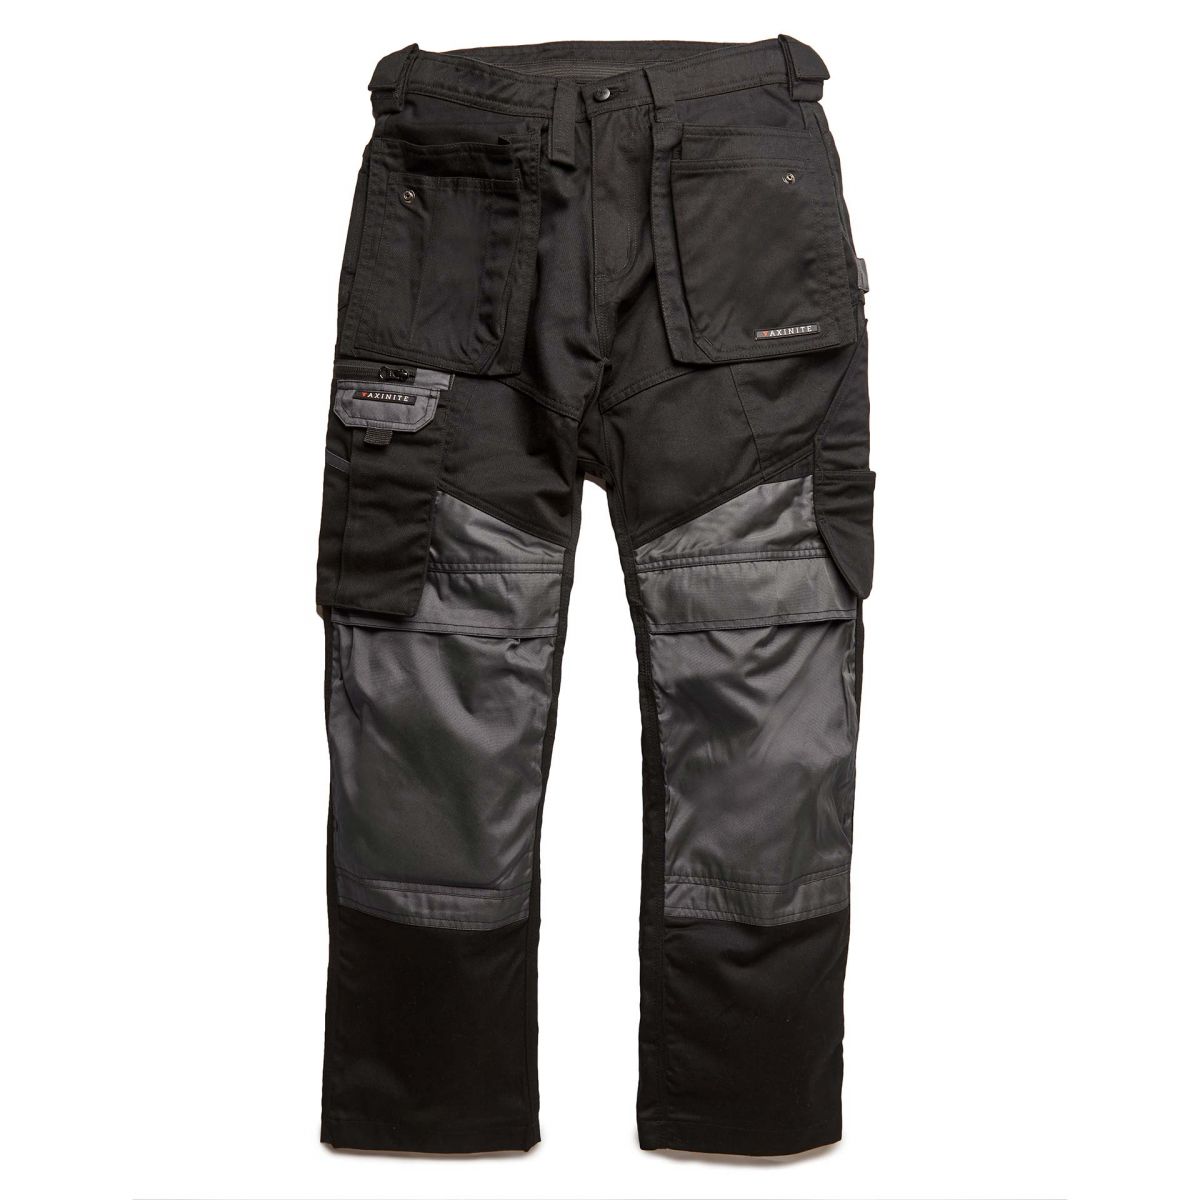 View Axinite AX39 Workwear Trousers Black 42L information